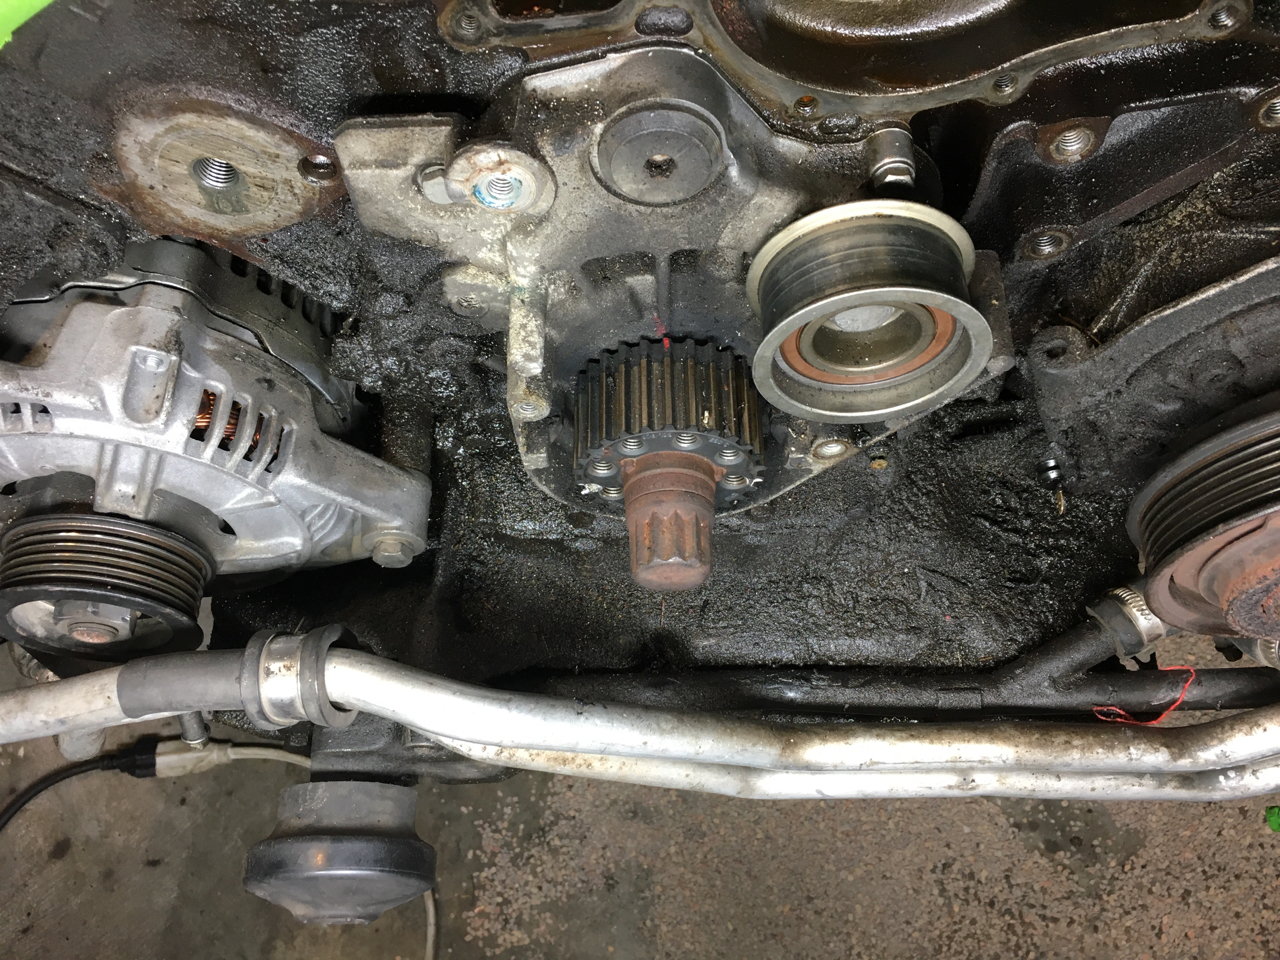 Head Gasket Replacement and more - AudiWorld Forums